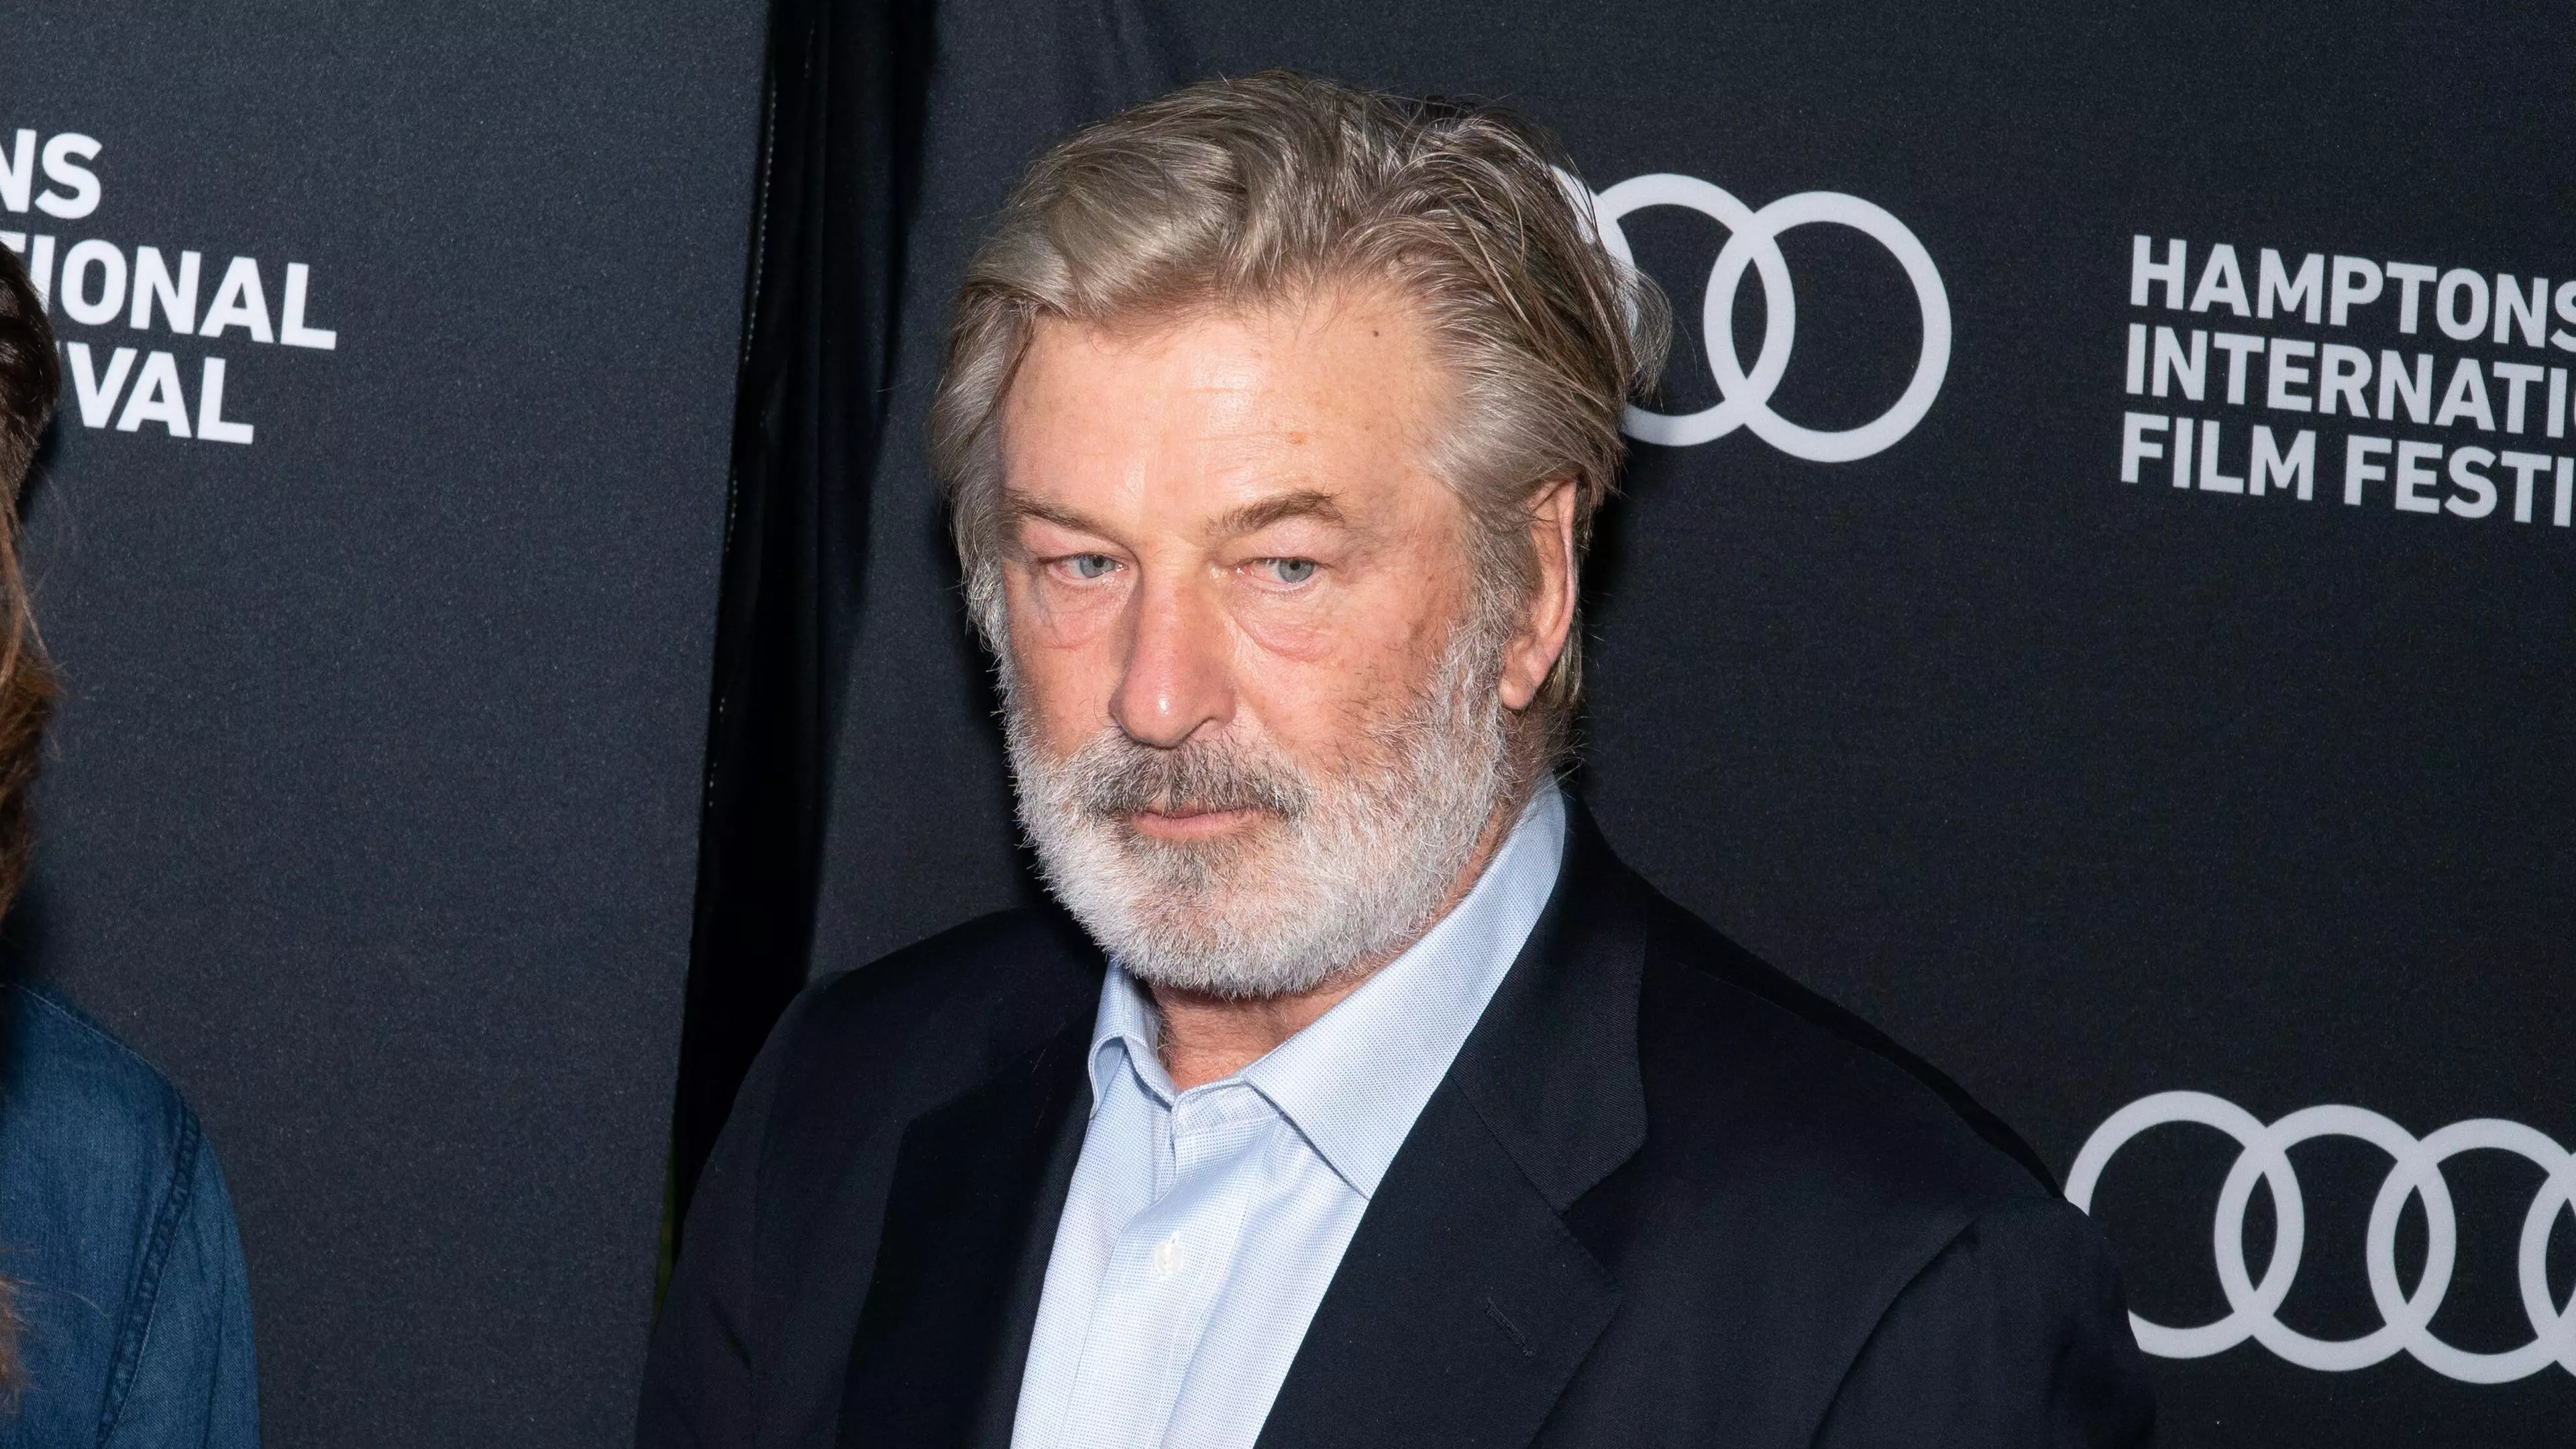 Alec Baldwin Deleted Eerie Photo From Instagram After Fatal Incident On Set